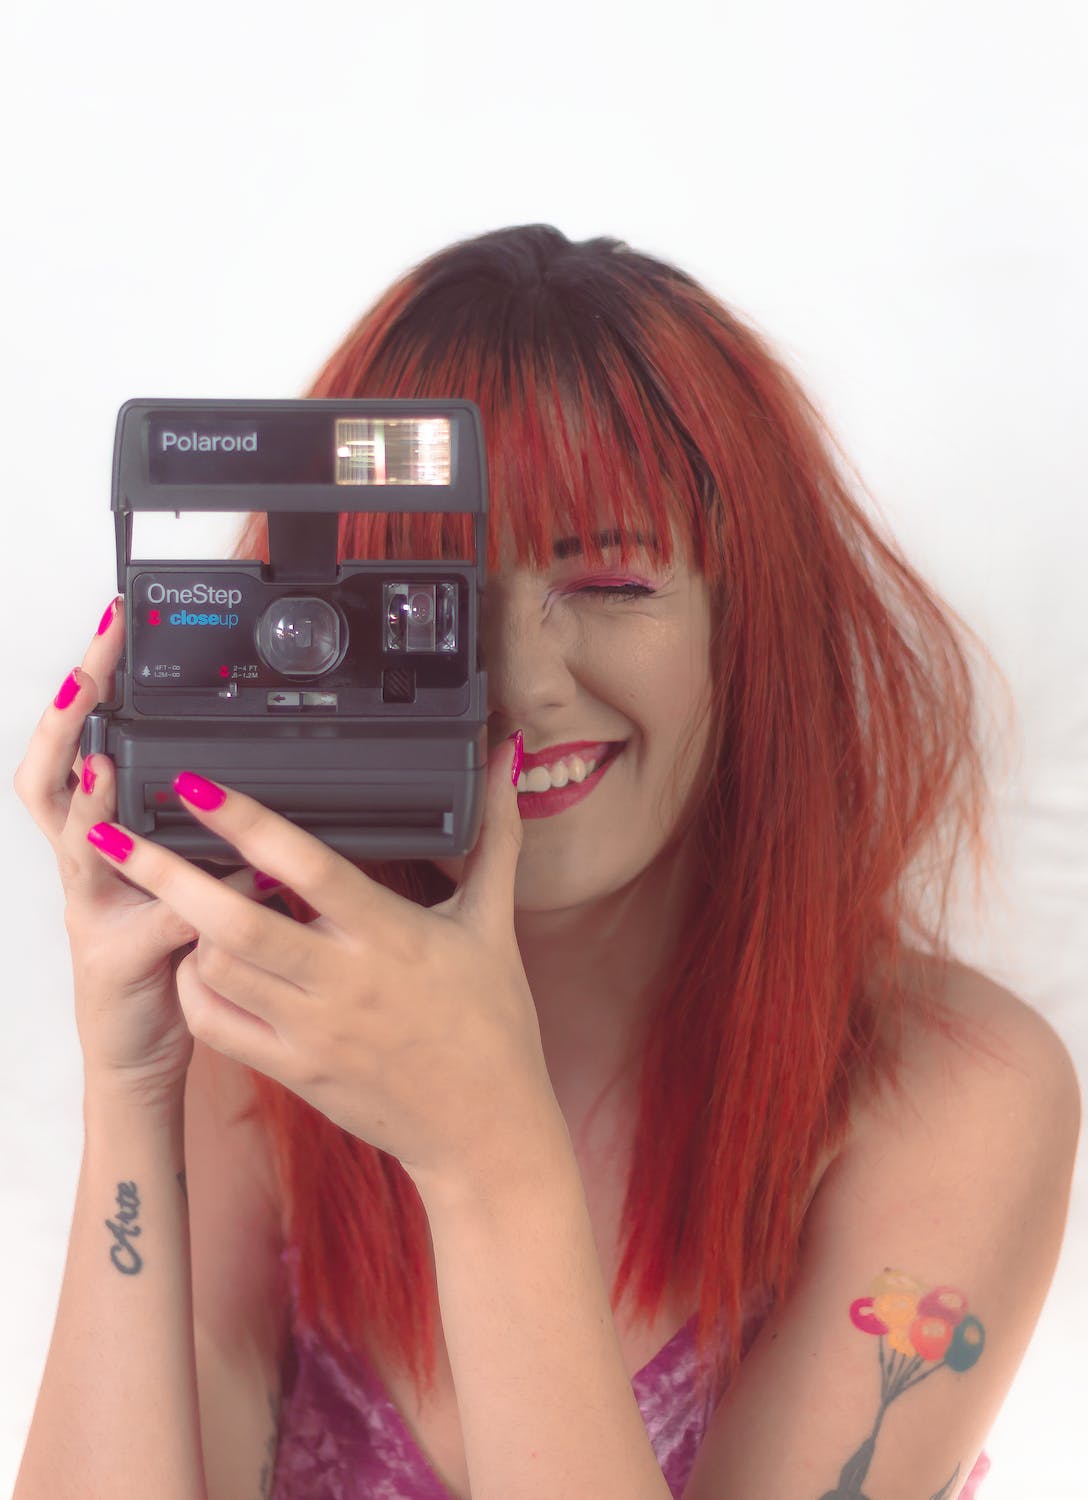 Woman Holding Polaroid Camera trying to focus on her subject